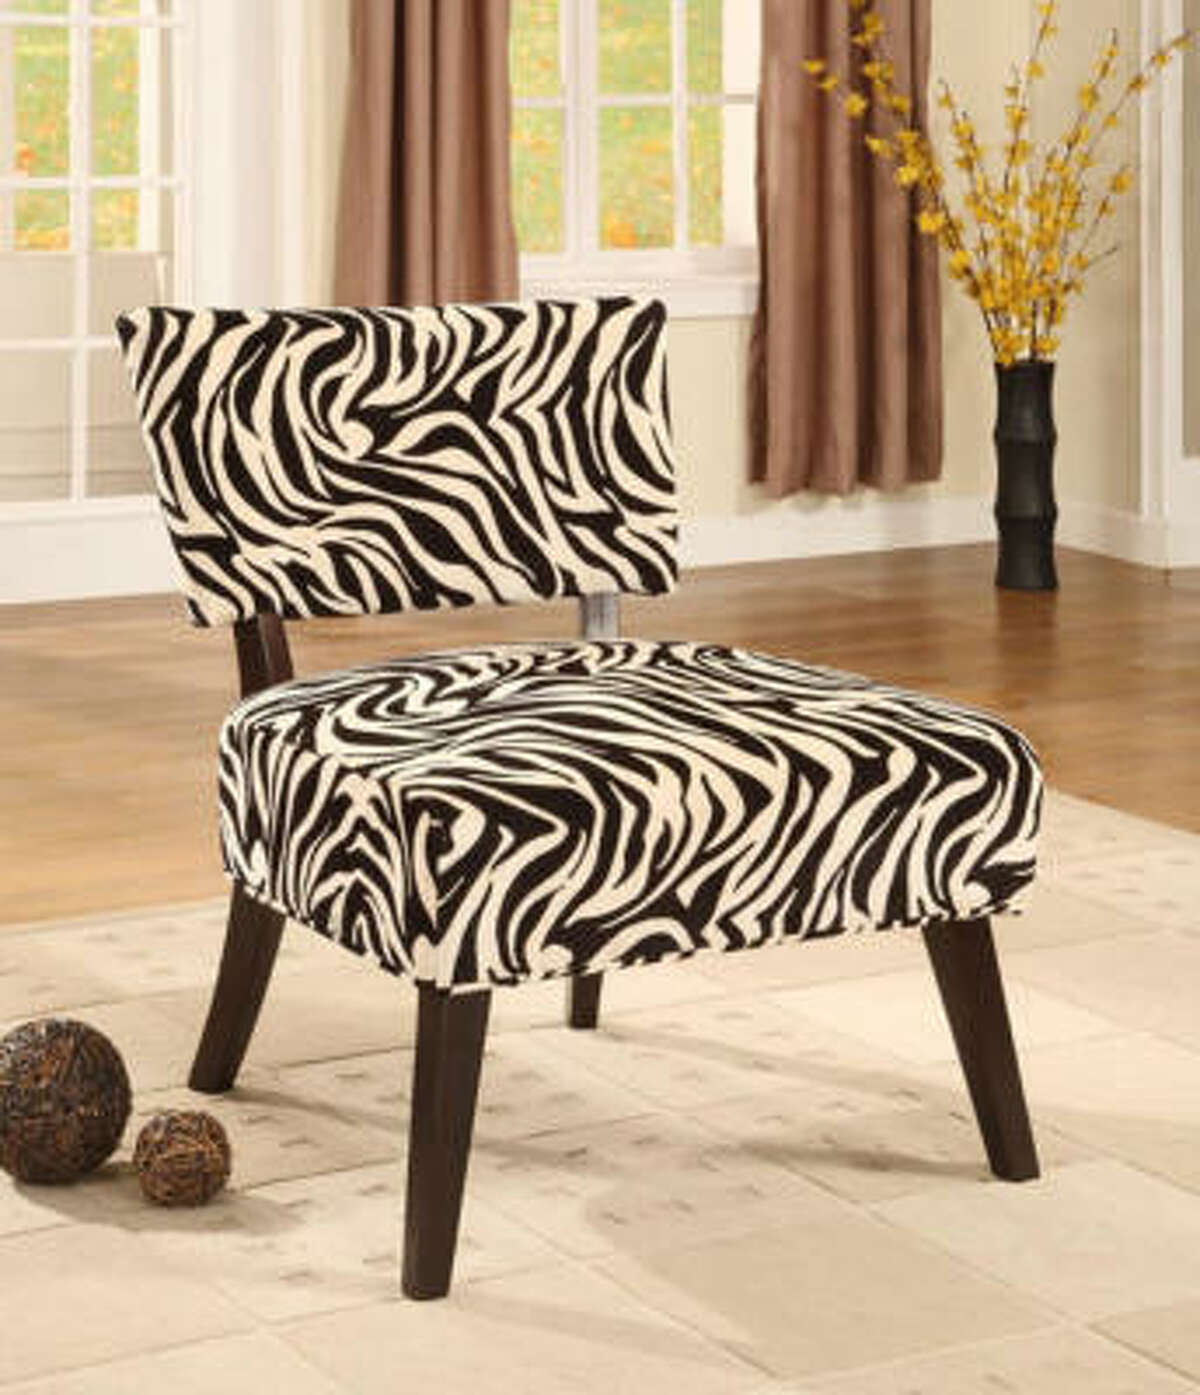 Occasional chair, $189.99, overstock.com.